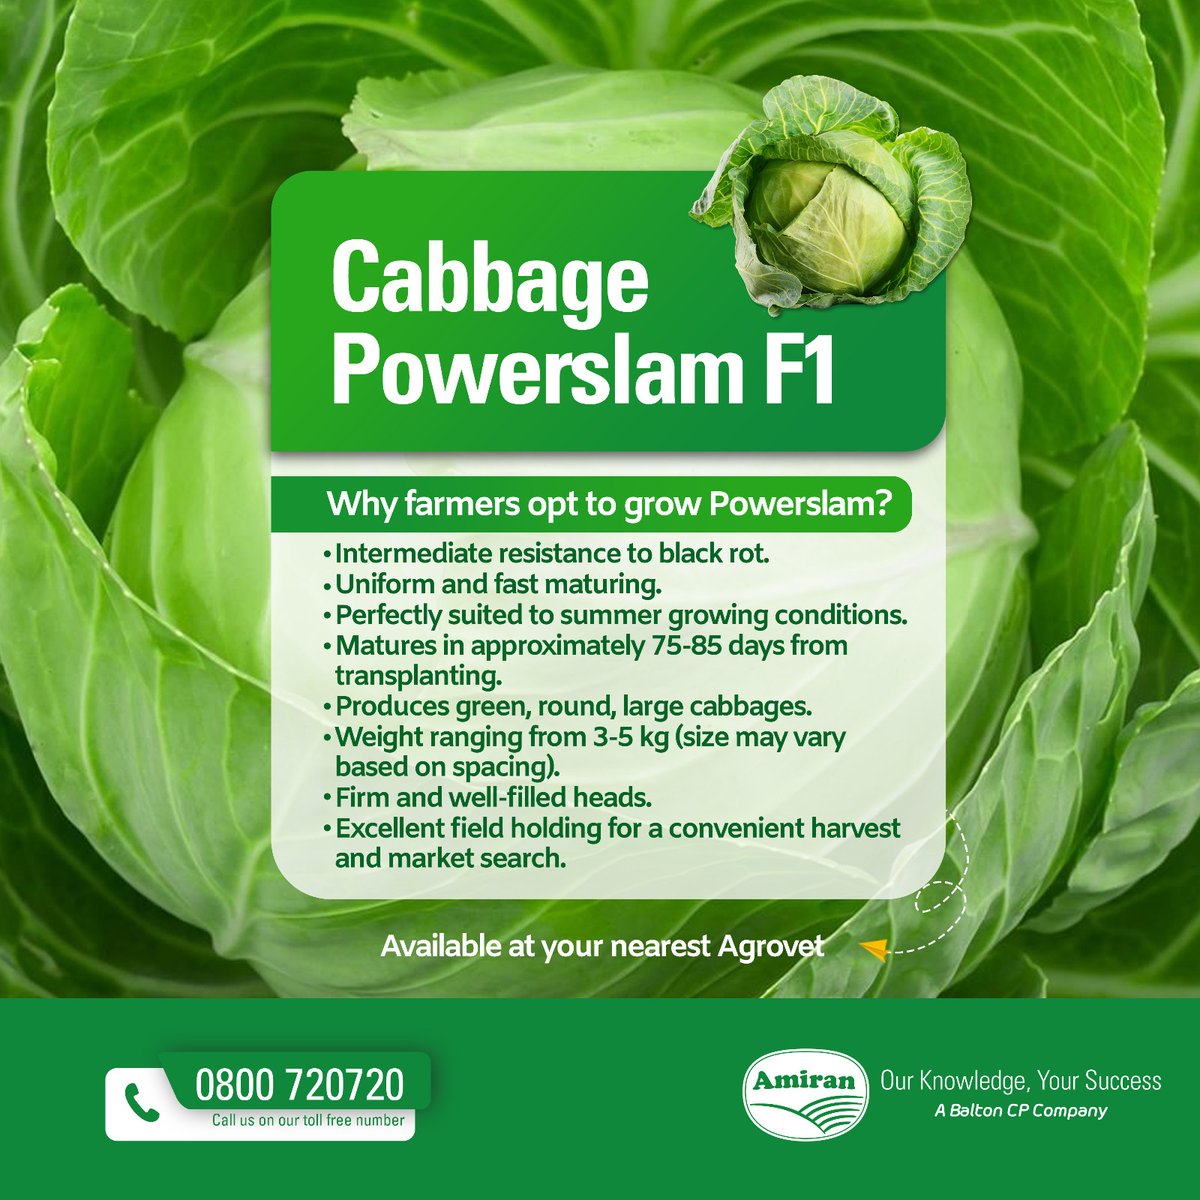 POWERSLAM F1 RESTOCKED !! Powerslam F1 hybrid cabbage variety has resistance to black making it highly suitable for growing conditions in #Kenya Here's why new and established farmers are growing Powerslam F1: Ready to try Powerslam F1? Call us for free on 0800720720 to order.